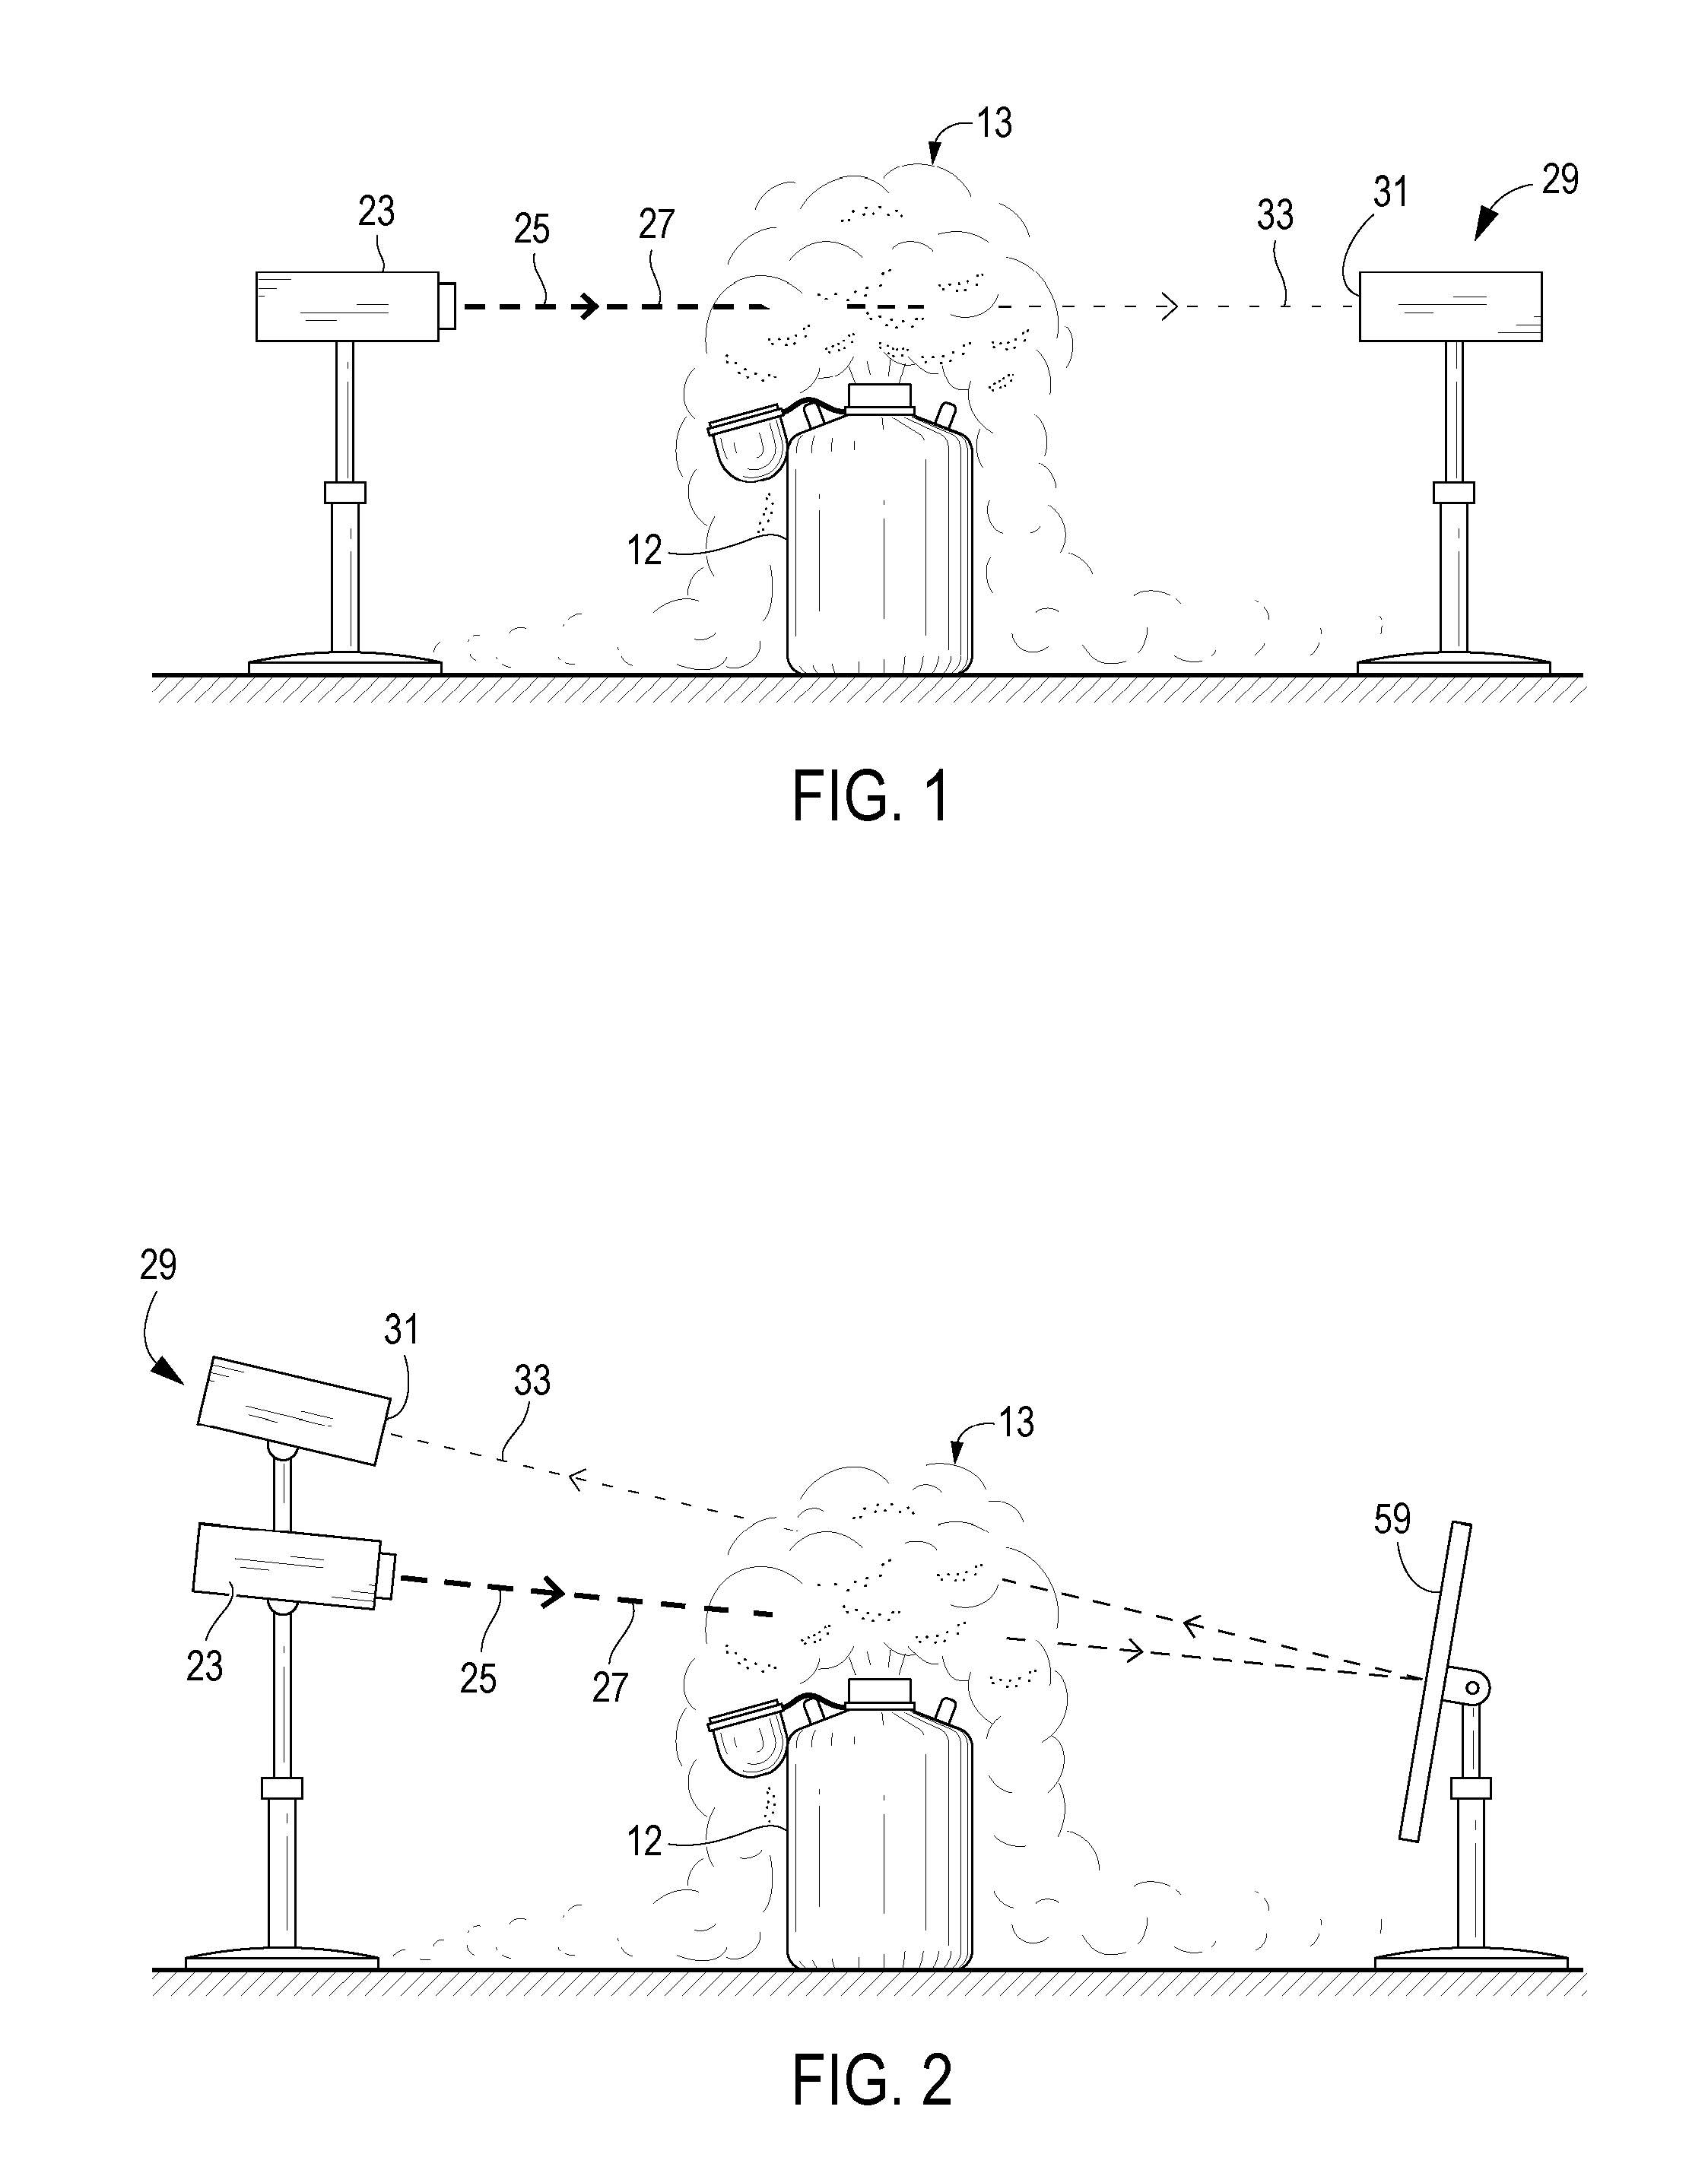 Apparatus and method for monitoring and regulating cryogenic cooling